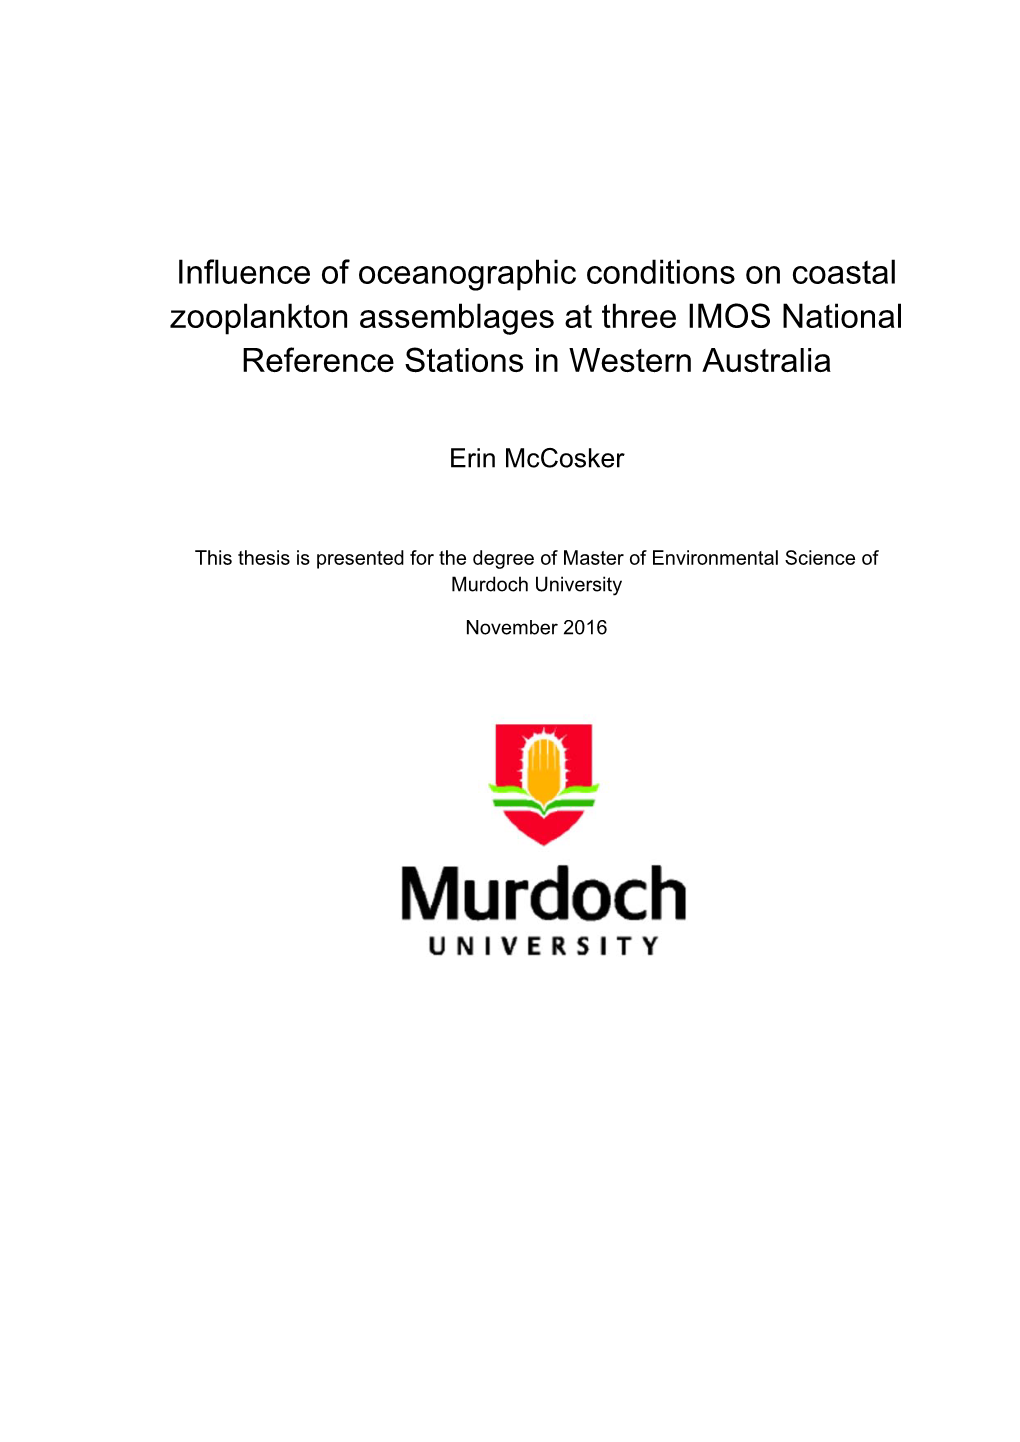 Influence of Oceanographic Conditions on Coastal Zooplankton Assemblages at Three IMOS National Reference Stations in Western Australia